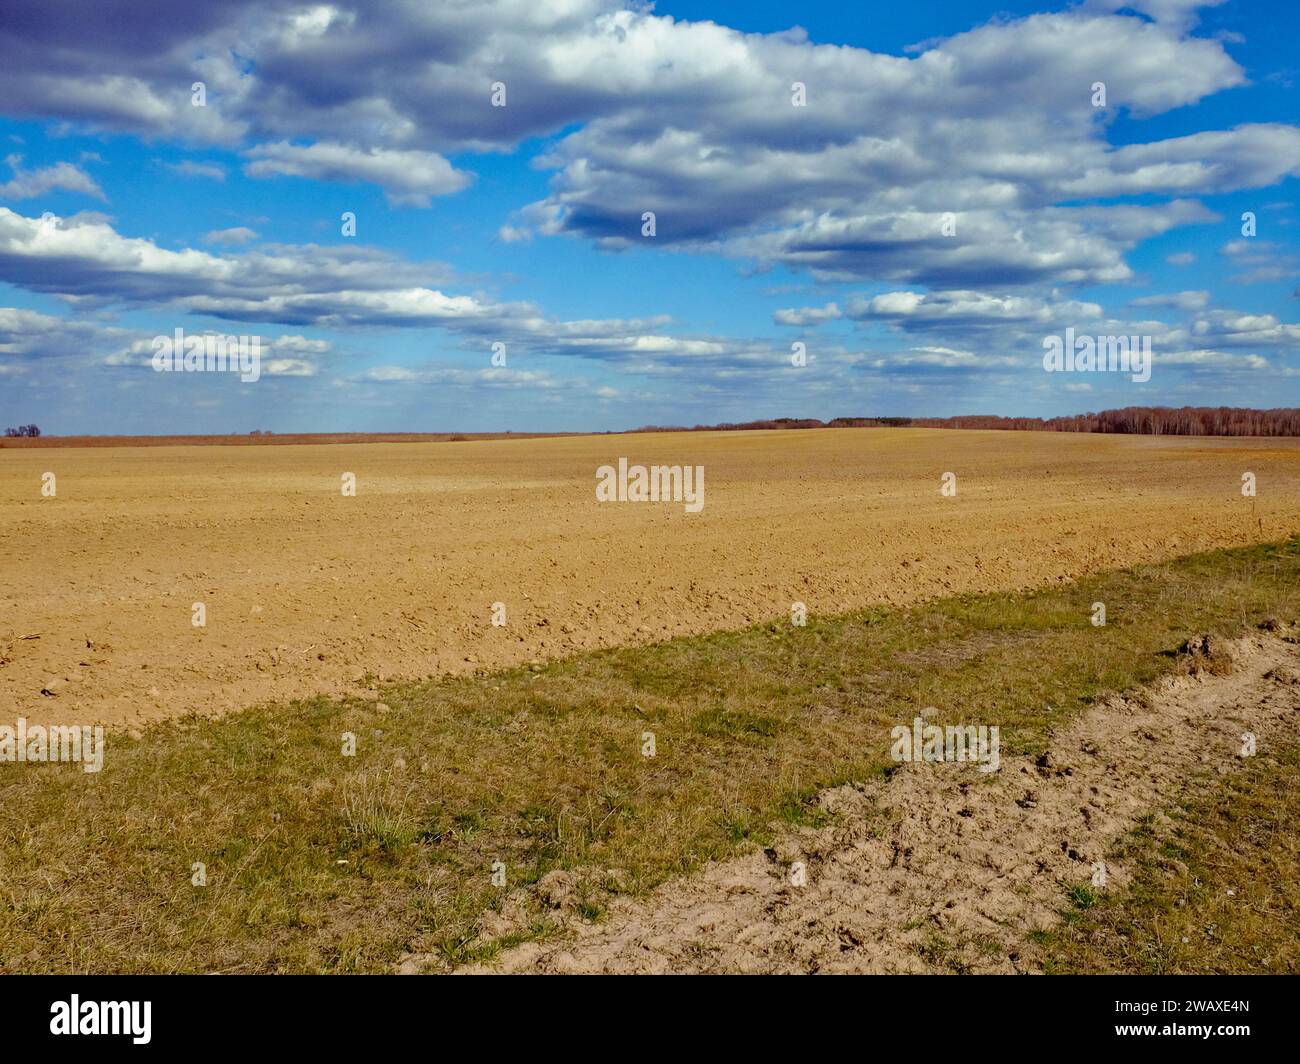 Open landscape, clear skies, and a barren field. Stock Photo